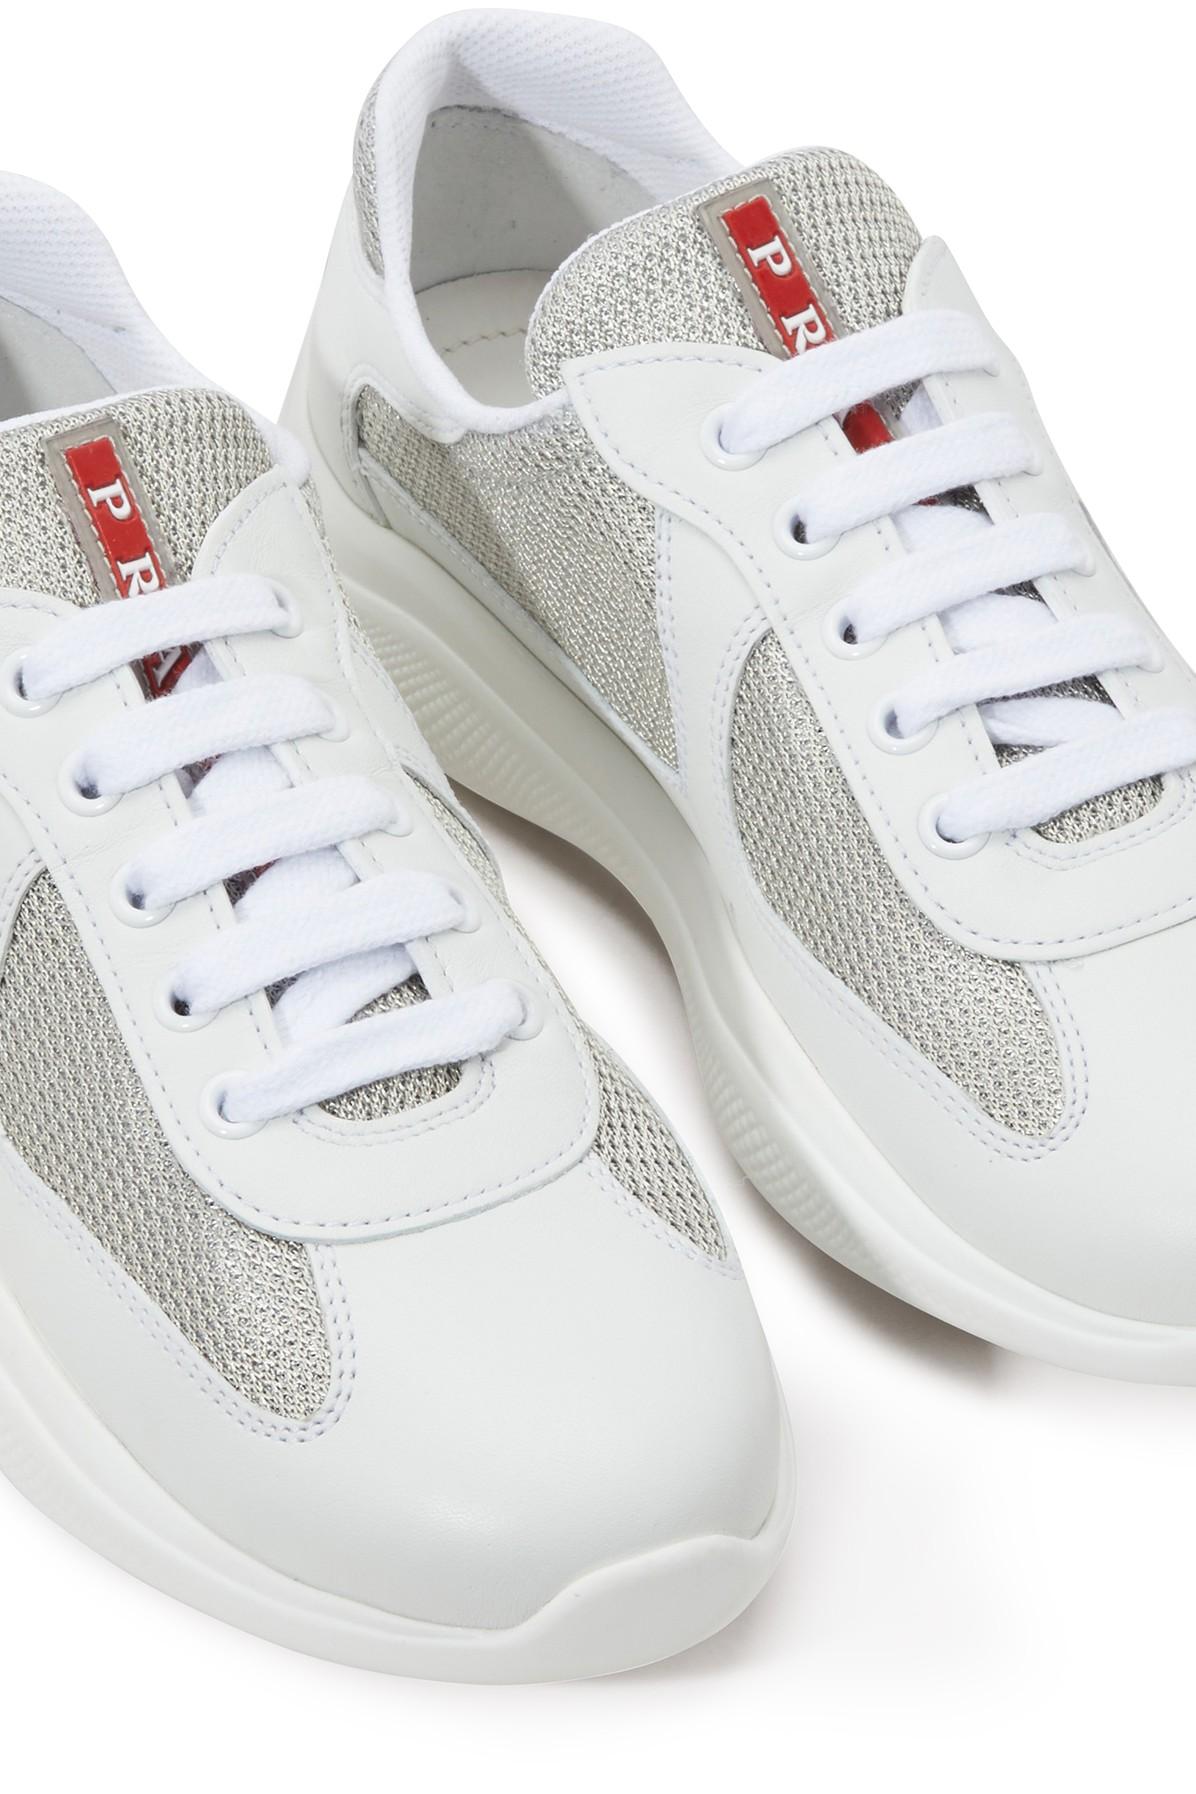 Prada Leather Xl America's Cup Trainers in White,Grey (White) - Lyst